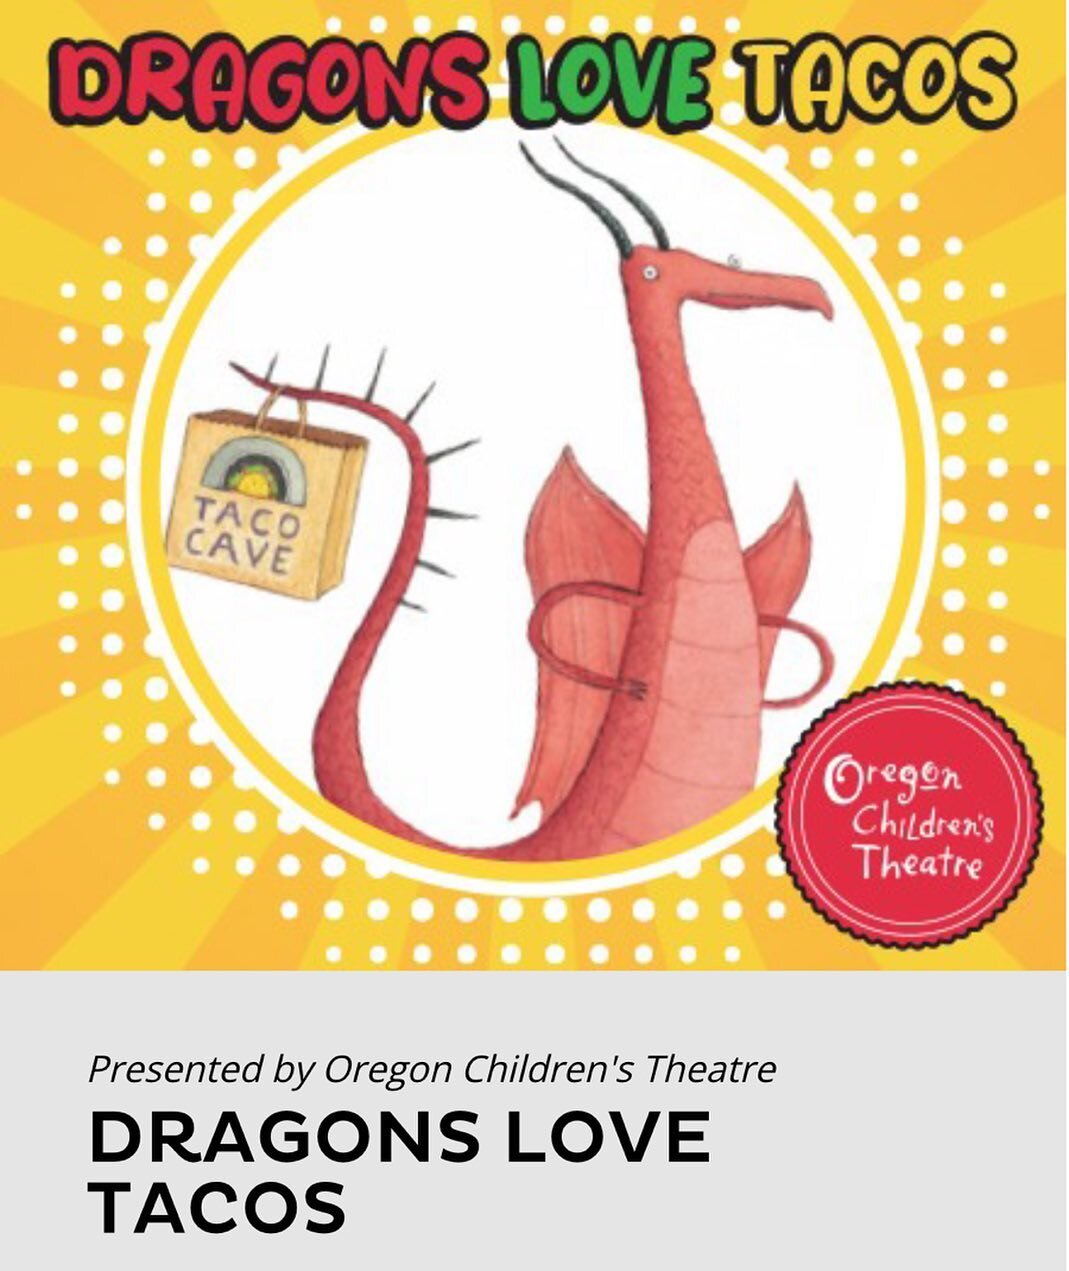 Well this was a fun Friday afternoon! It&rsquo;s hard the beat a full house, a good story, theatrical play on stage, and the uninhibited laughter of children. 🙌💛👏 Added bonus: Dragons. And tacos. 🌮 

Bravo @jessica_of_many_hats and team. 😀

#pdx